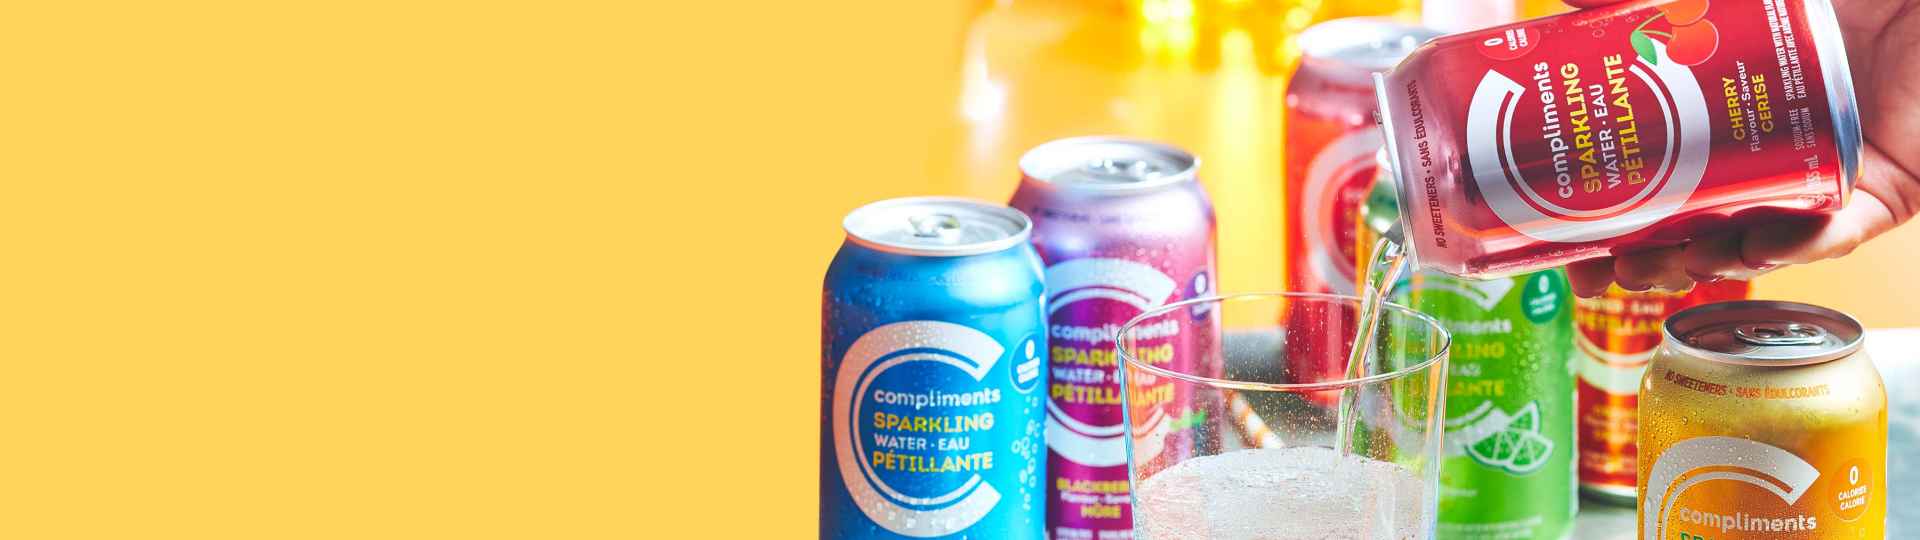 Compliments Sparkling Water contest